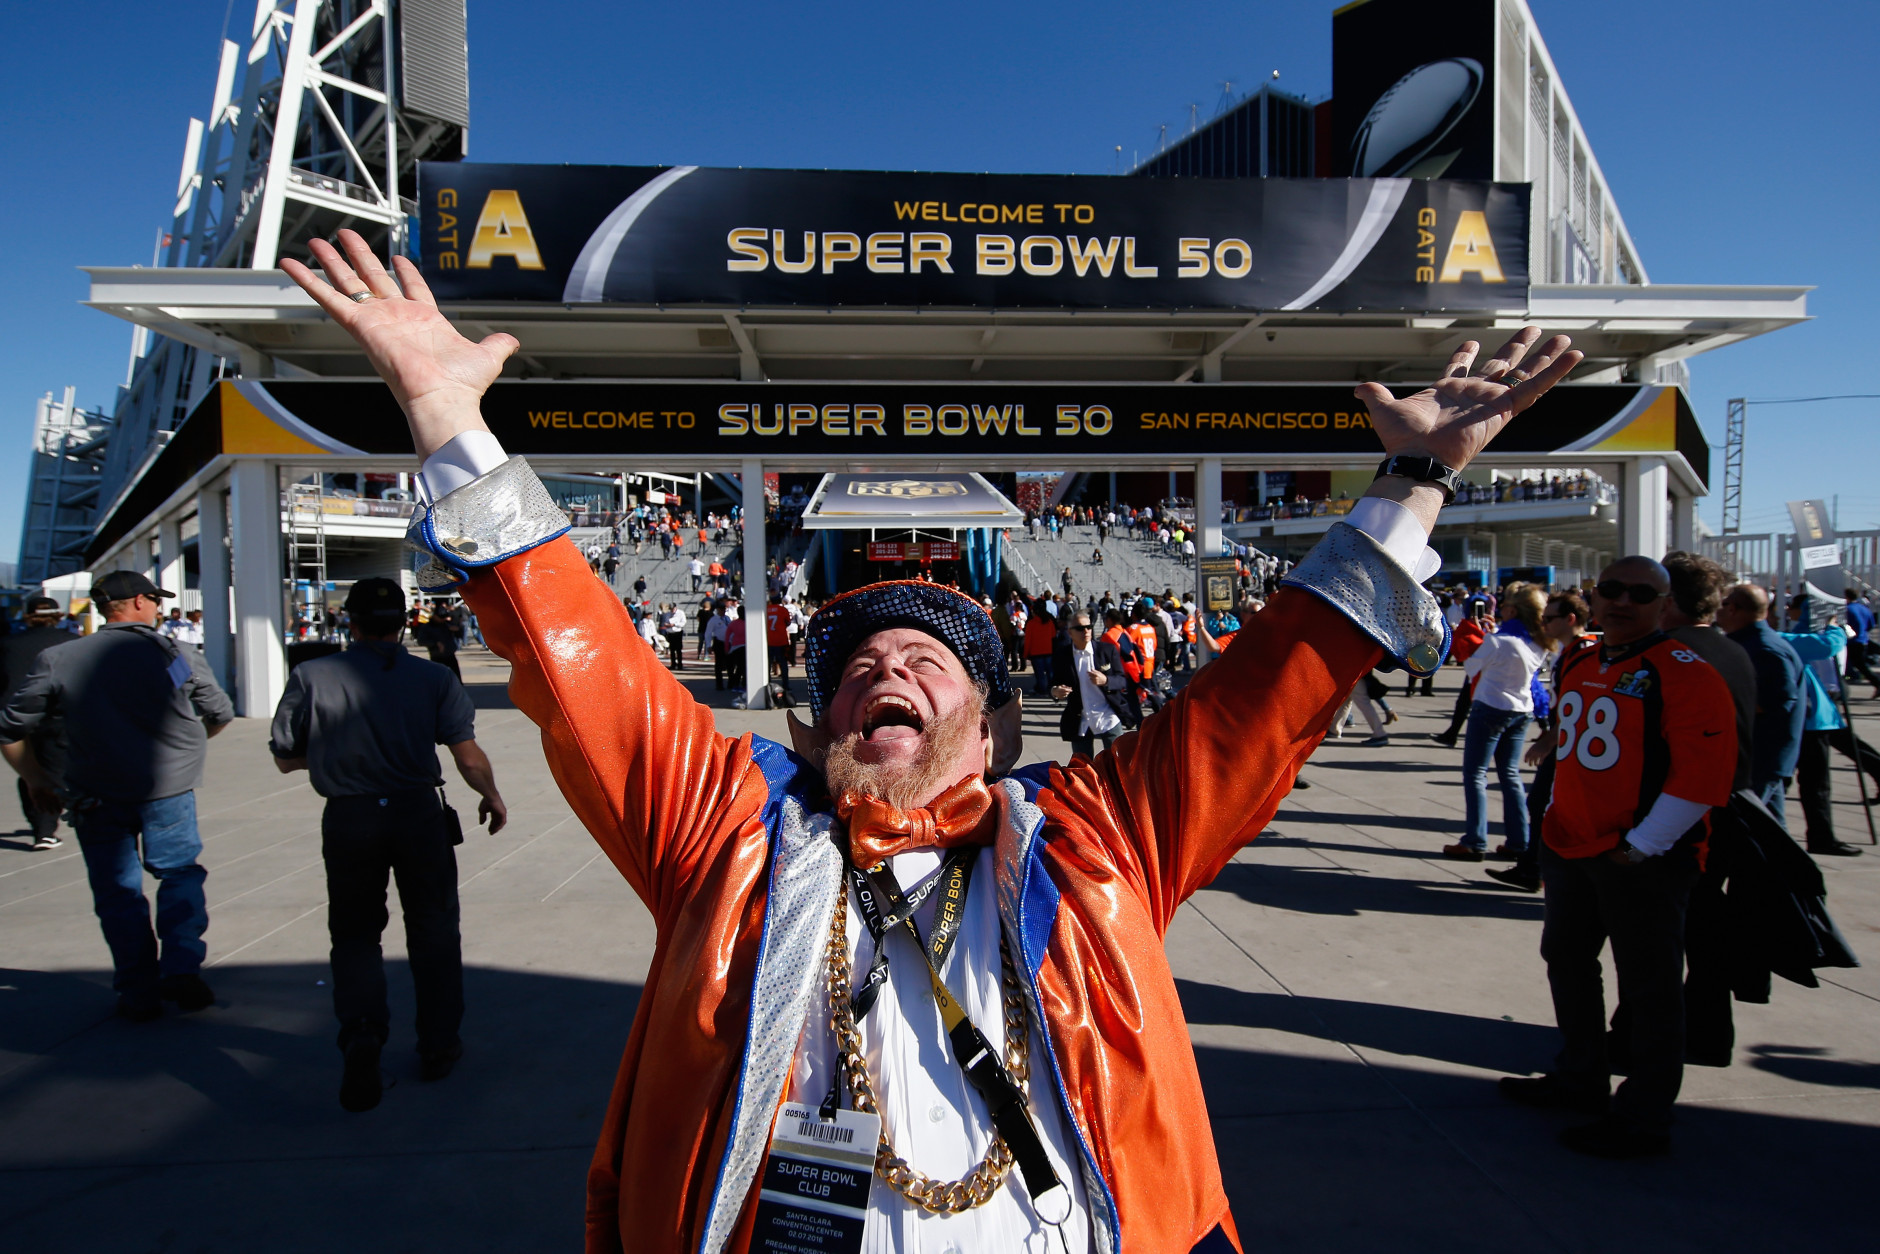 SANTA CLARA, CA - FEBRUARY 07:  Denver Broncos fan "Rocky the Leprechaun" poses outside of Levi's Stadium prior to Super Bowl 50 between the Denver Broncos and the Carolina Panthers on February 7, 2016 in Santa Clara, California.  (Photo by Sean M. Haffey/Getty Images)